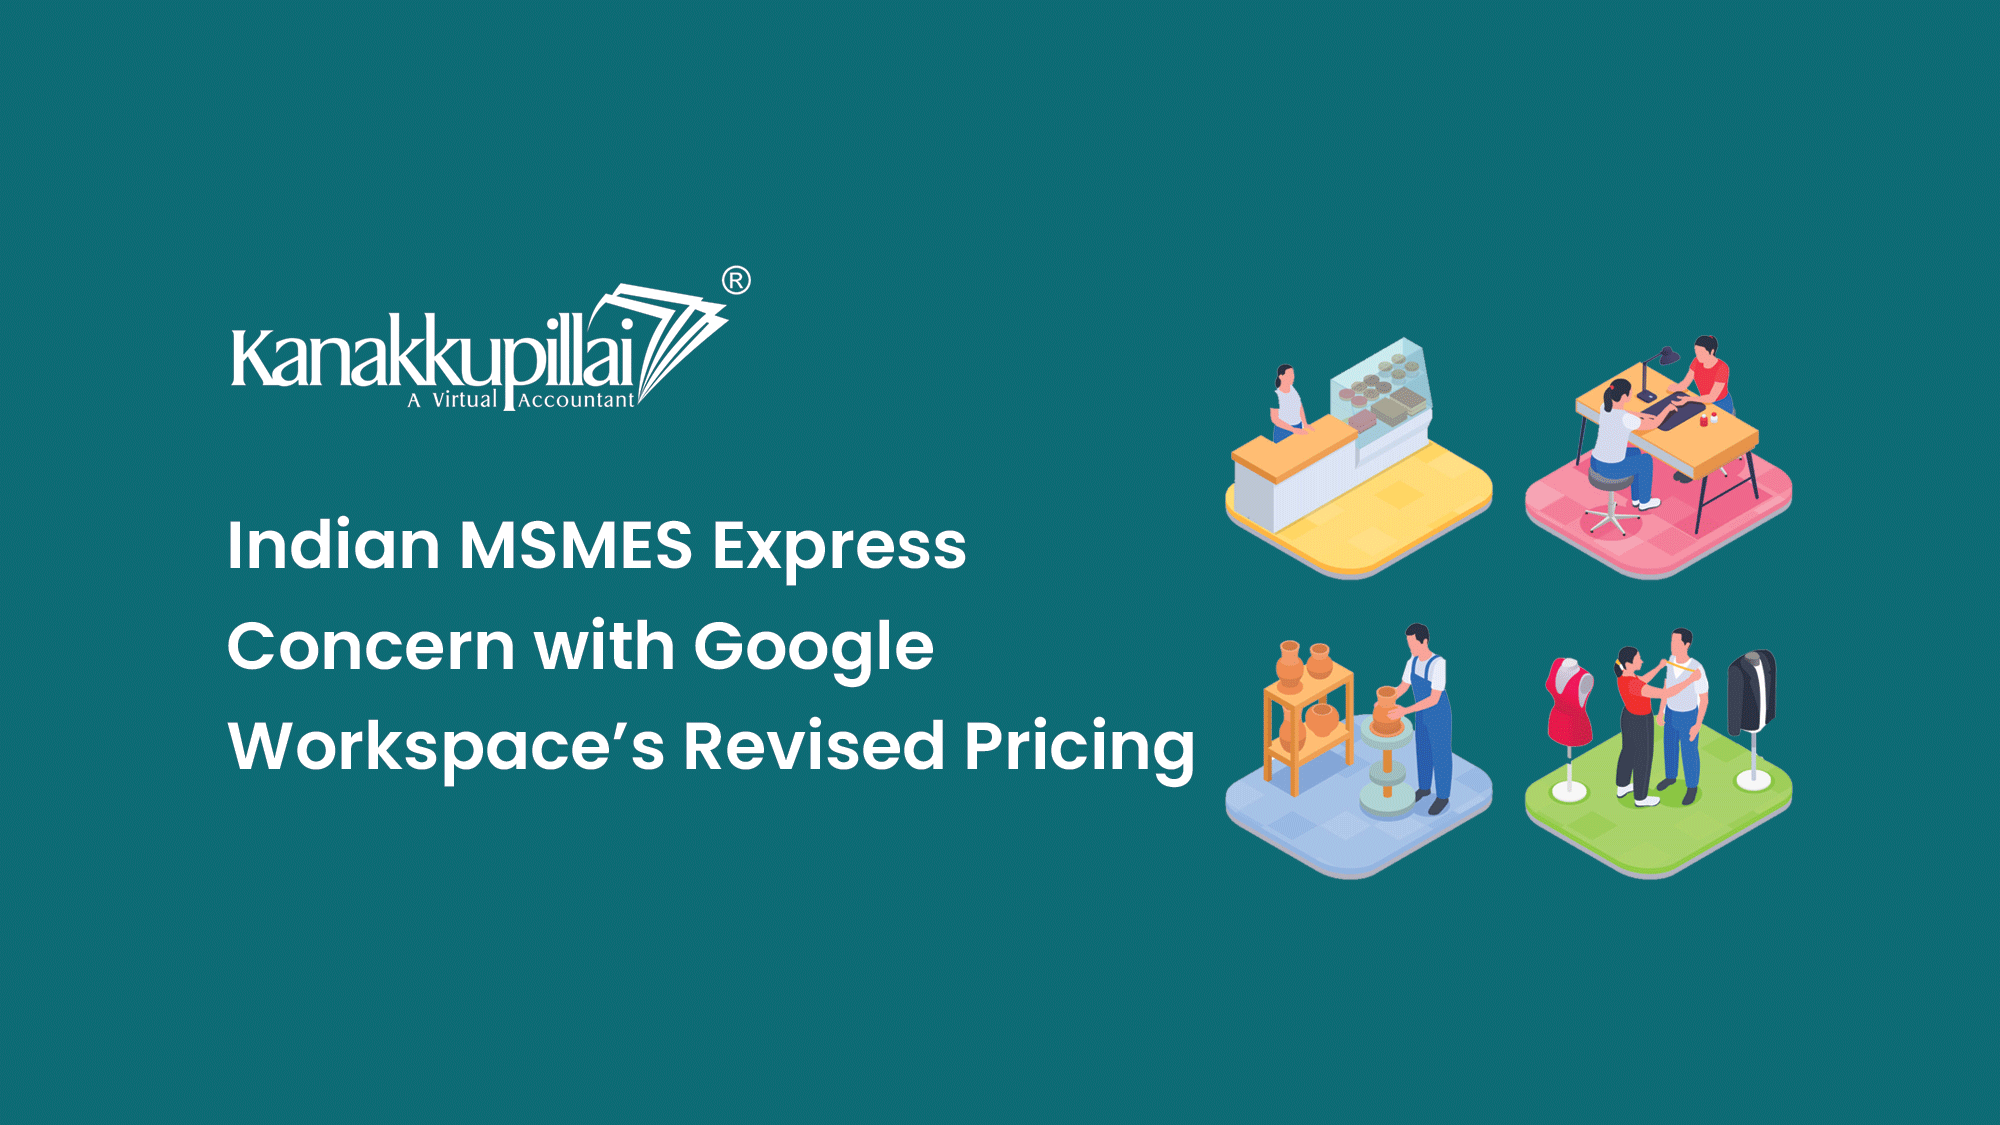 Indian MSMES Express Concern with Google Workspace’s Revised Pricing